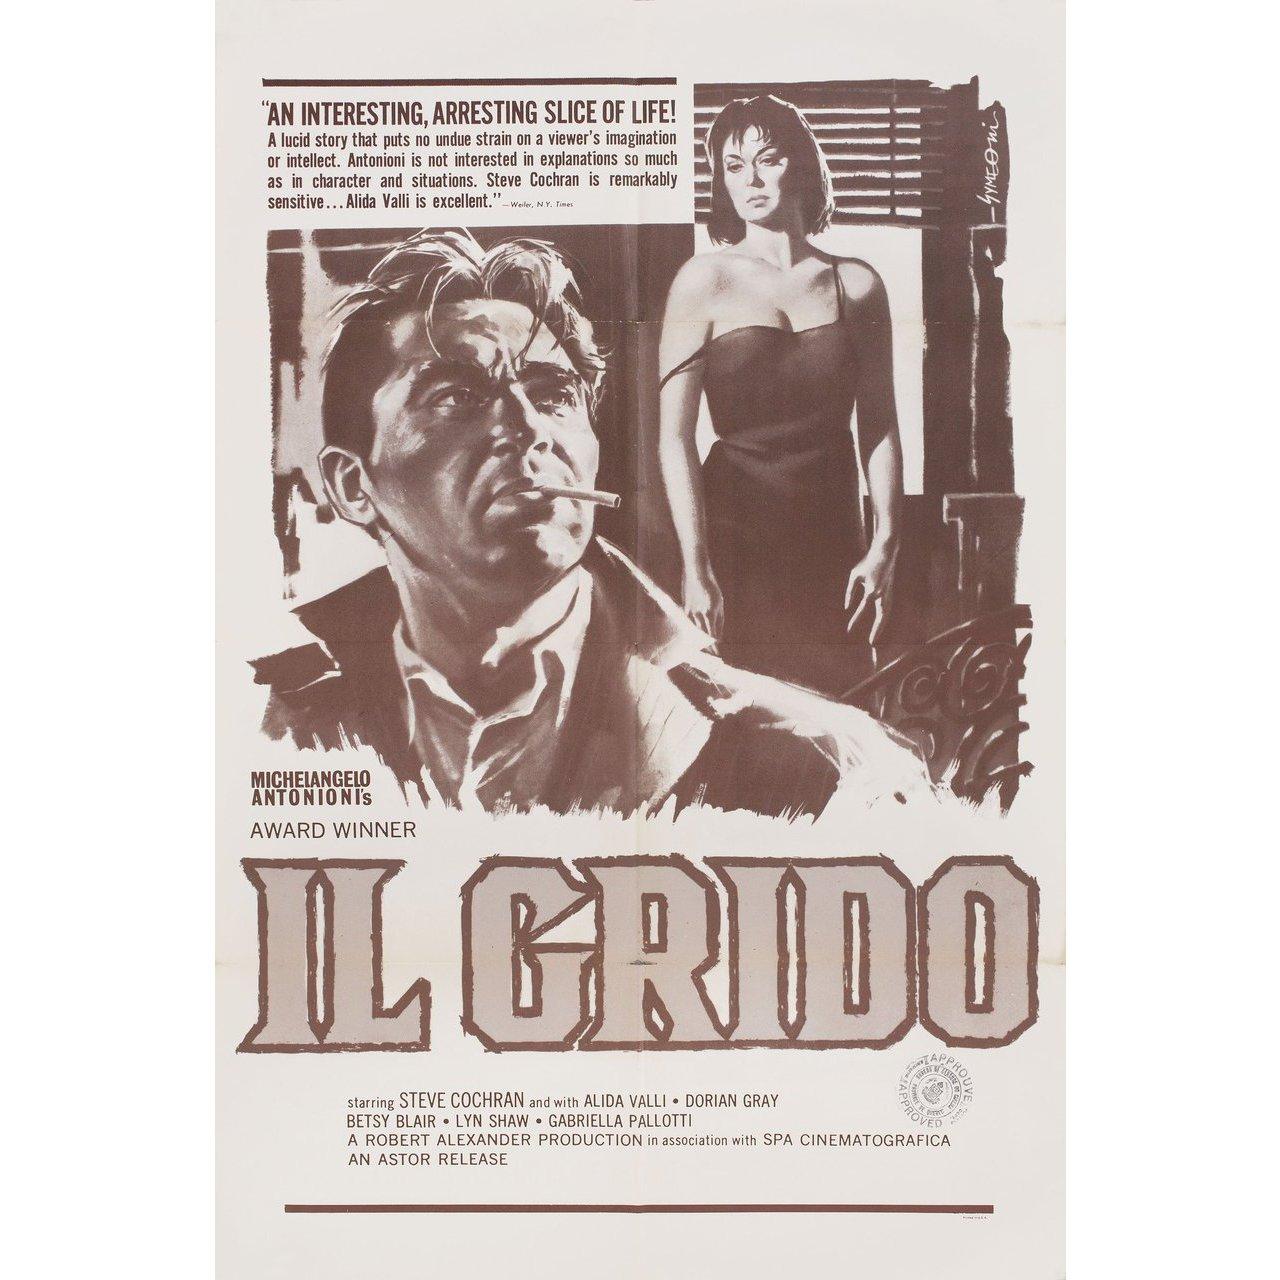 Original 1957 U.S. one sheet poster for the film Il Grido (The Cry) directed by Michelangelo Antonioni with Steve Cochran / Alida Valli / Betsy Blair / Gabriella Pallotta. Very Good-Fine condition, folded with censor stamp. Many original posters